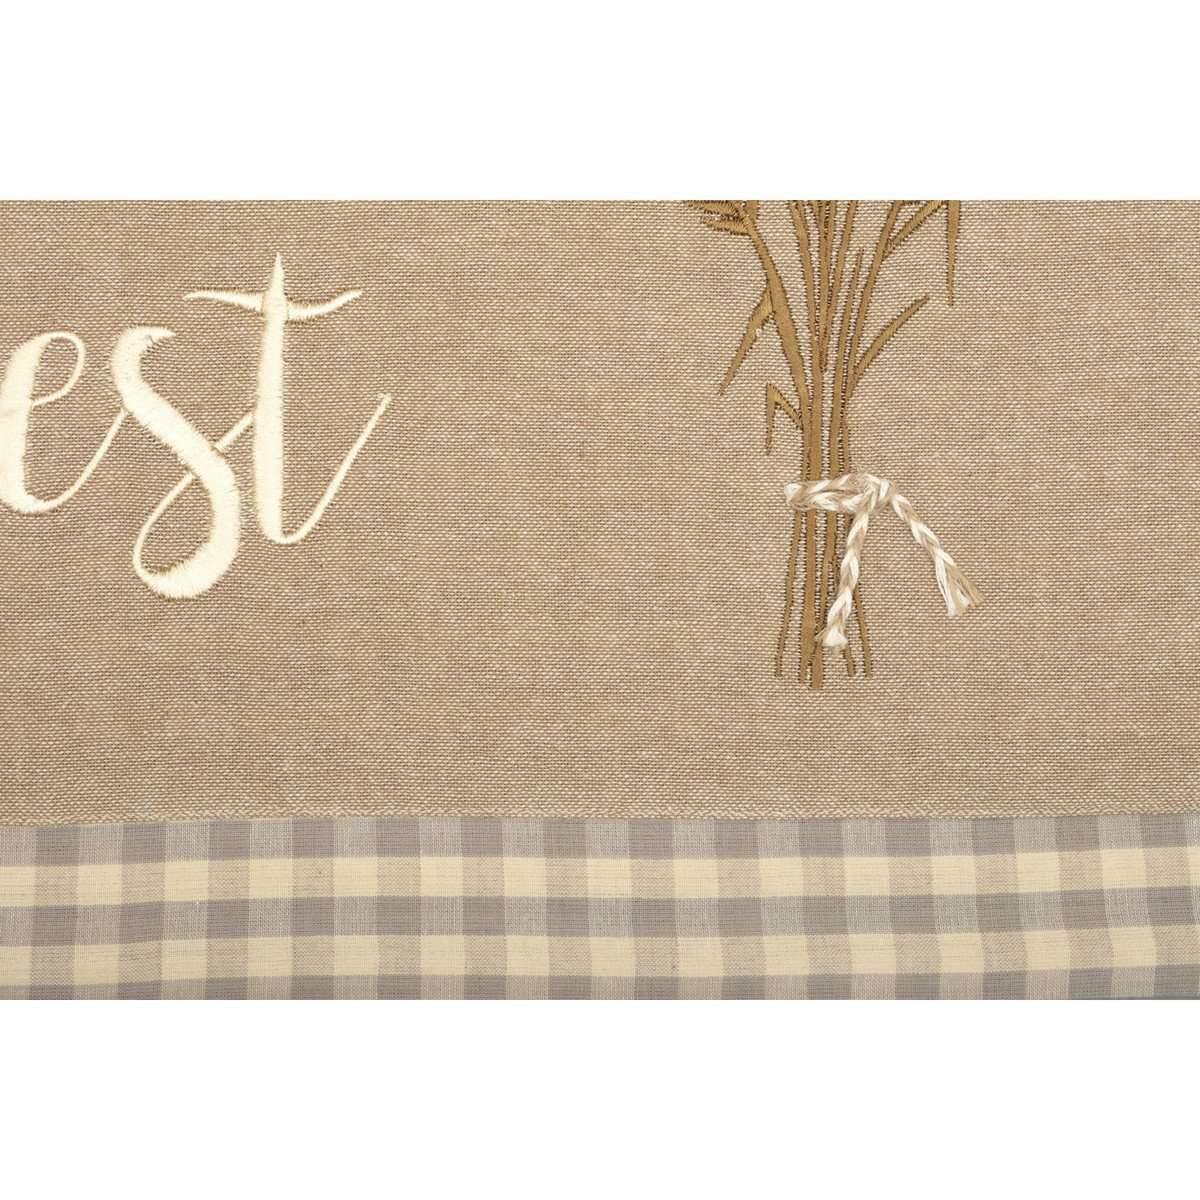 Grace Welcome Harvest Pillow 14x22 VHC Brands zoom